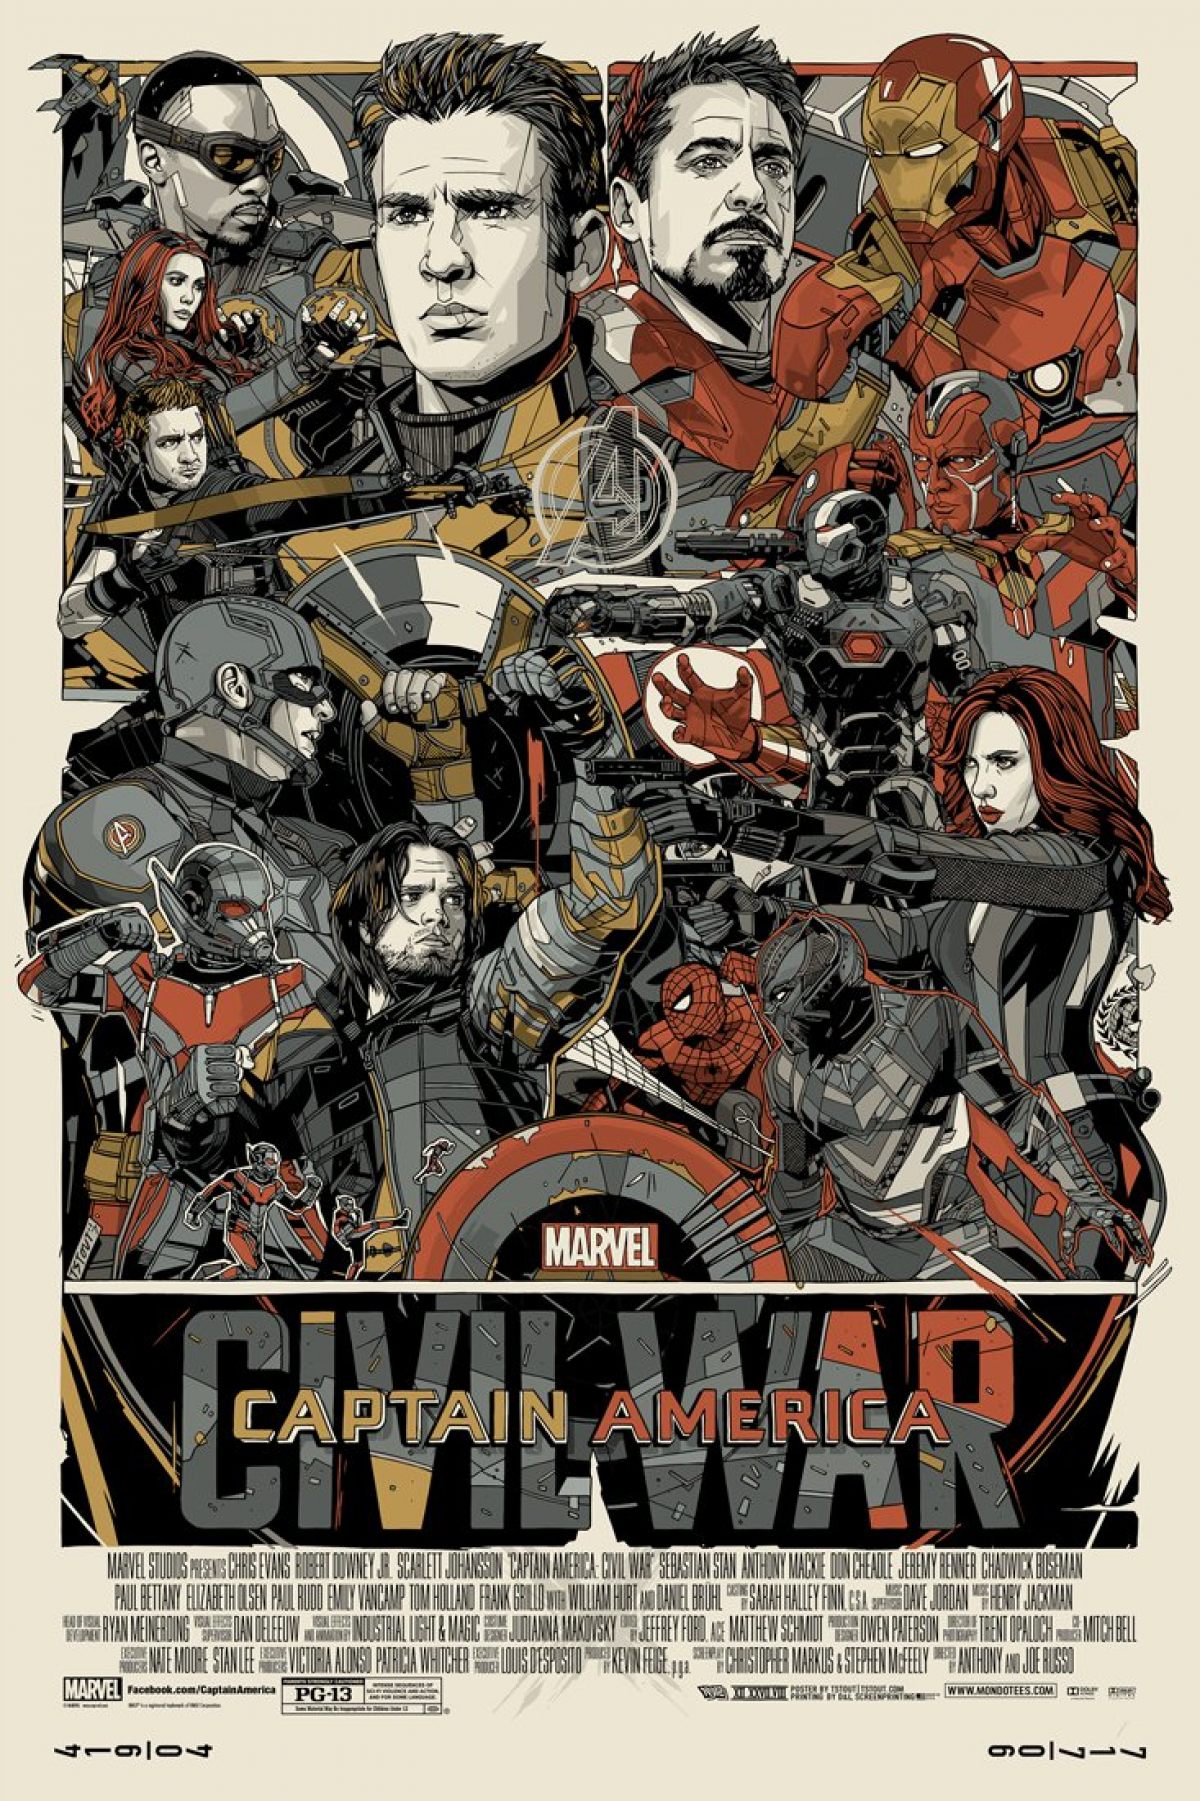 Captain America: Civil War Is Captured Perfectly In This Insanely Epic New Poster